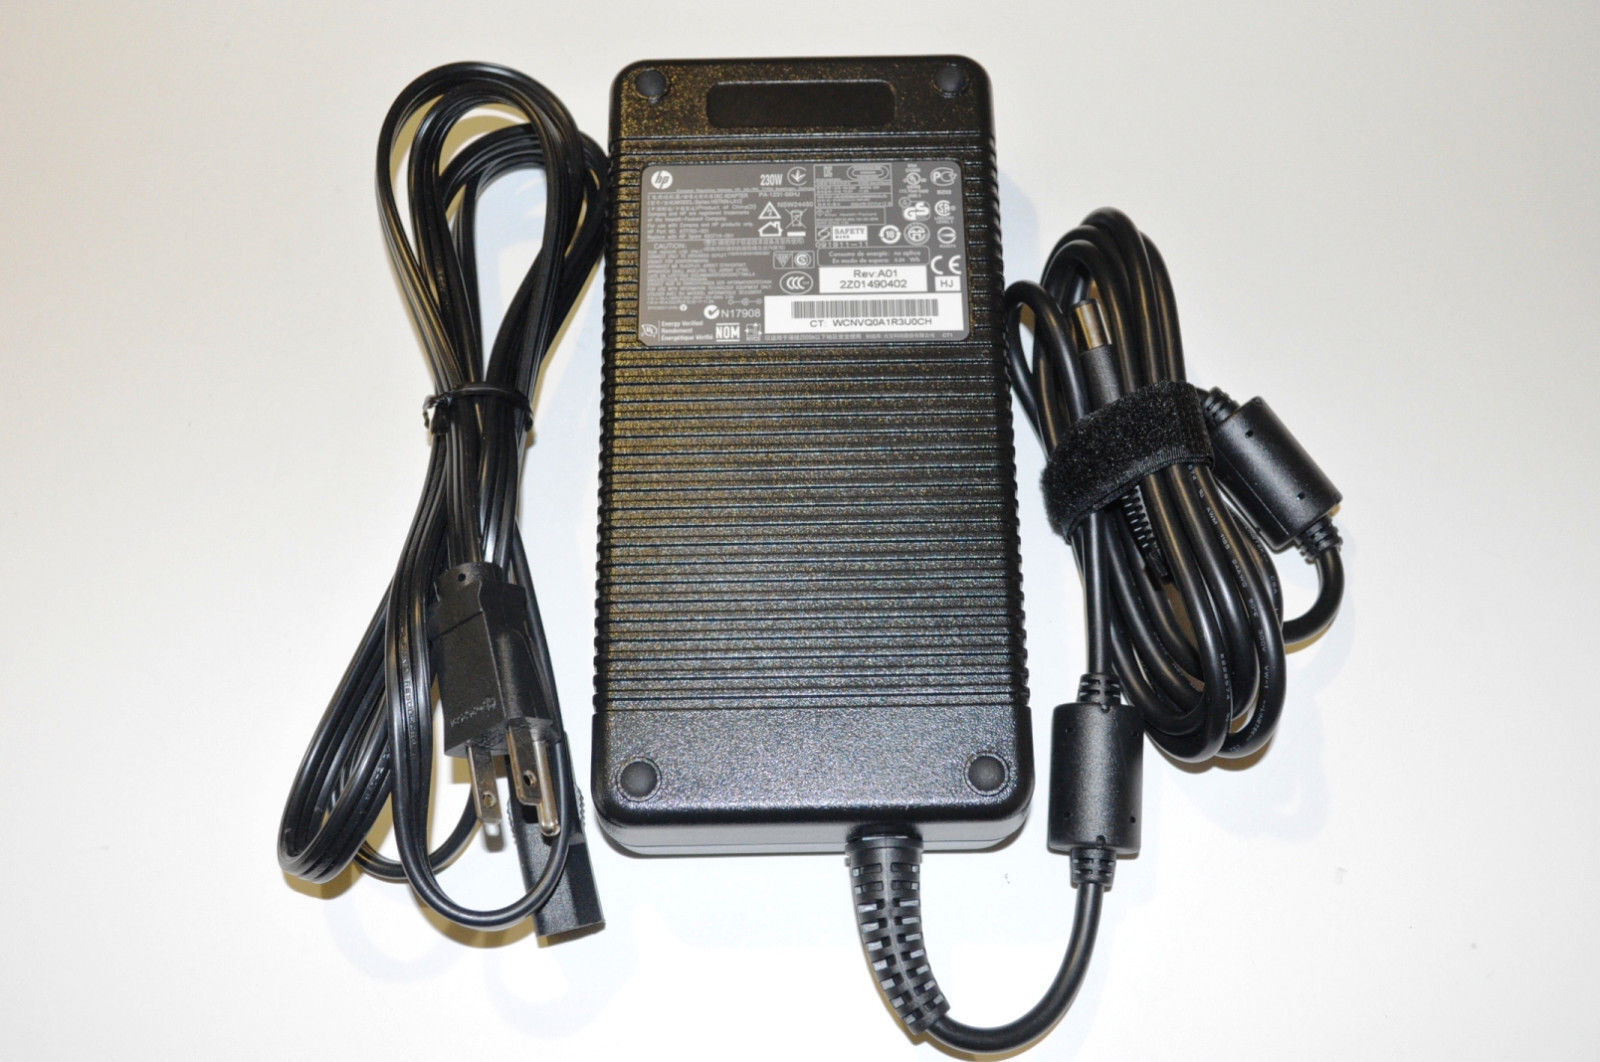 New Original HP 230w AC Adapter With Power Cord For ZBook 15 G1 15 G2 677765-001